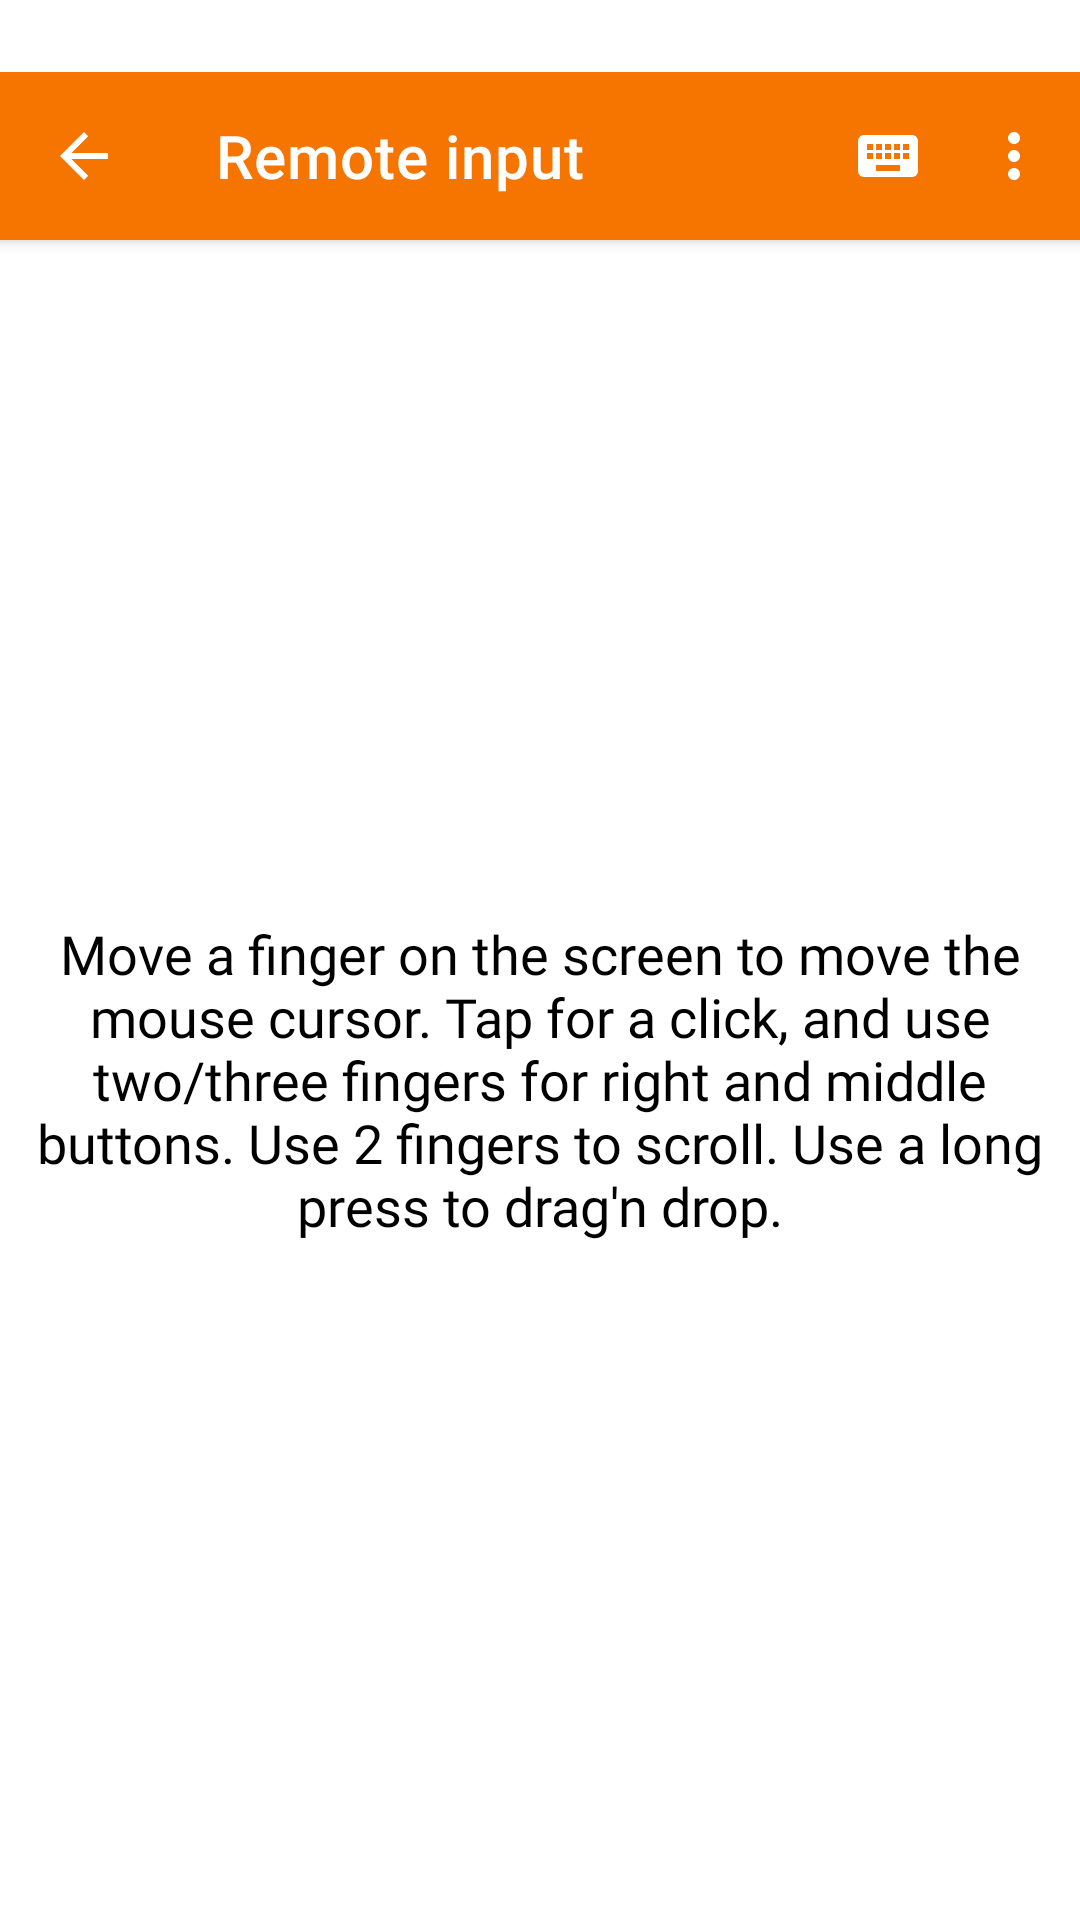 KDE Connect Remote Touchpad Input on Android